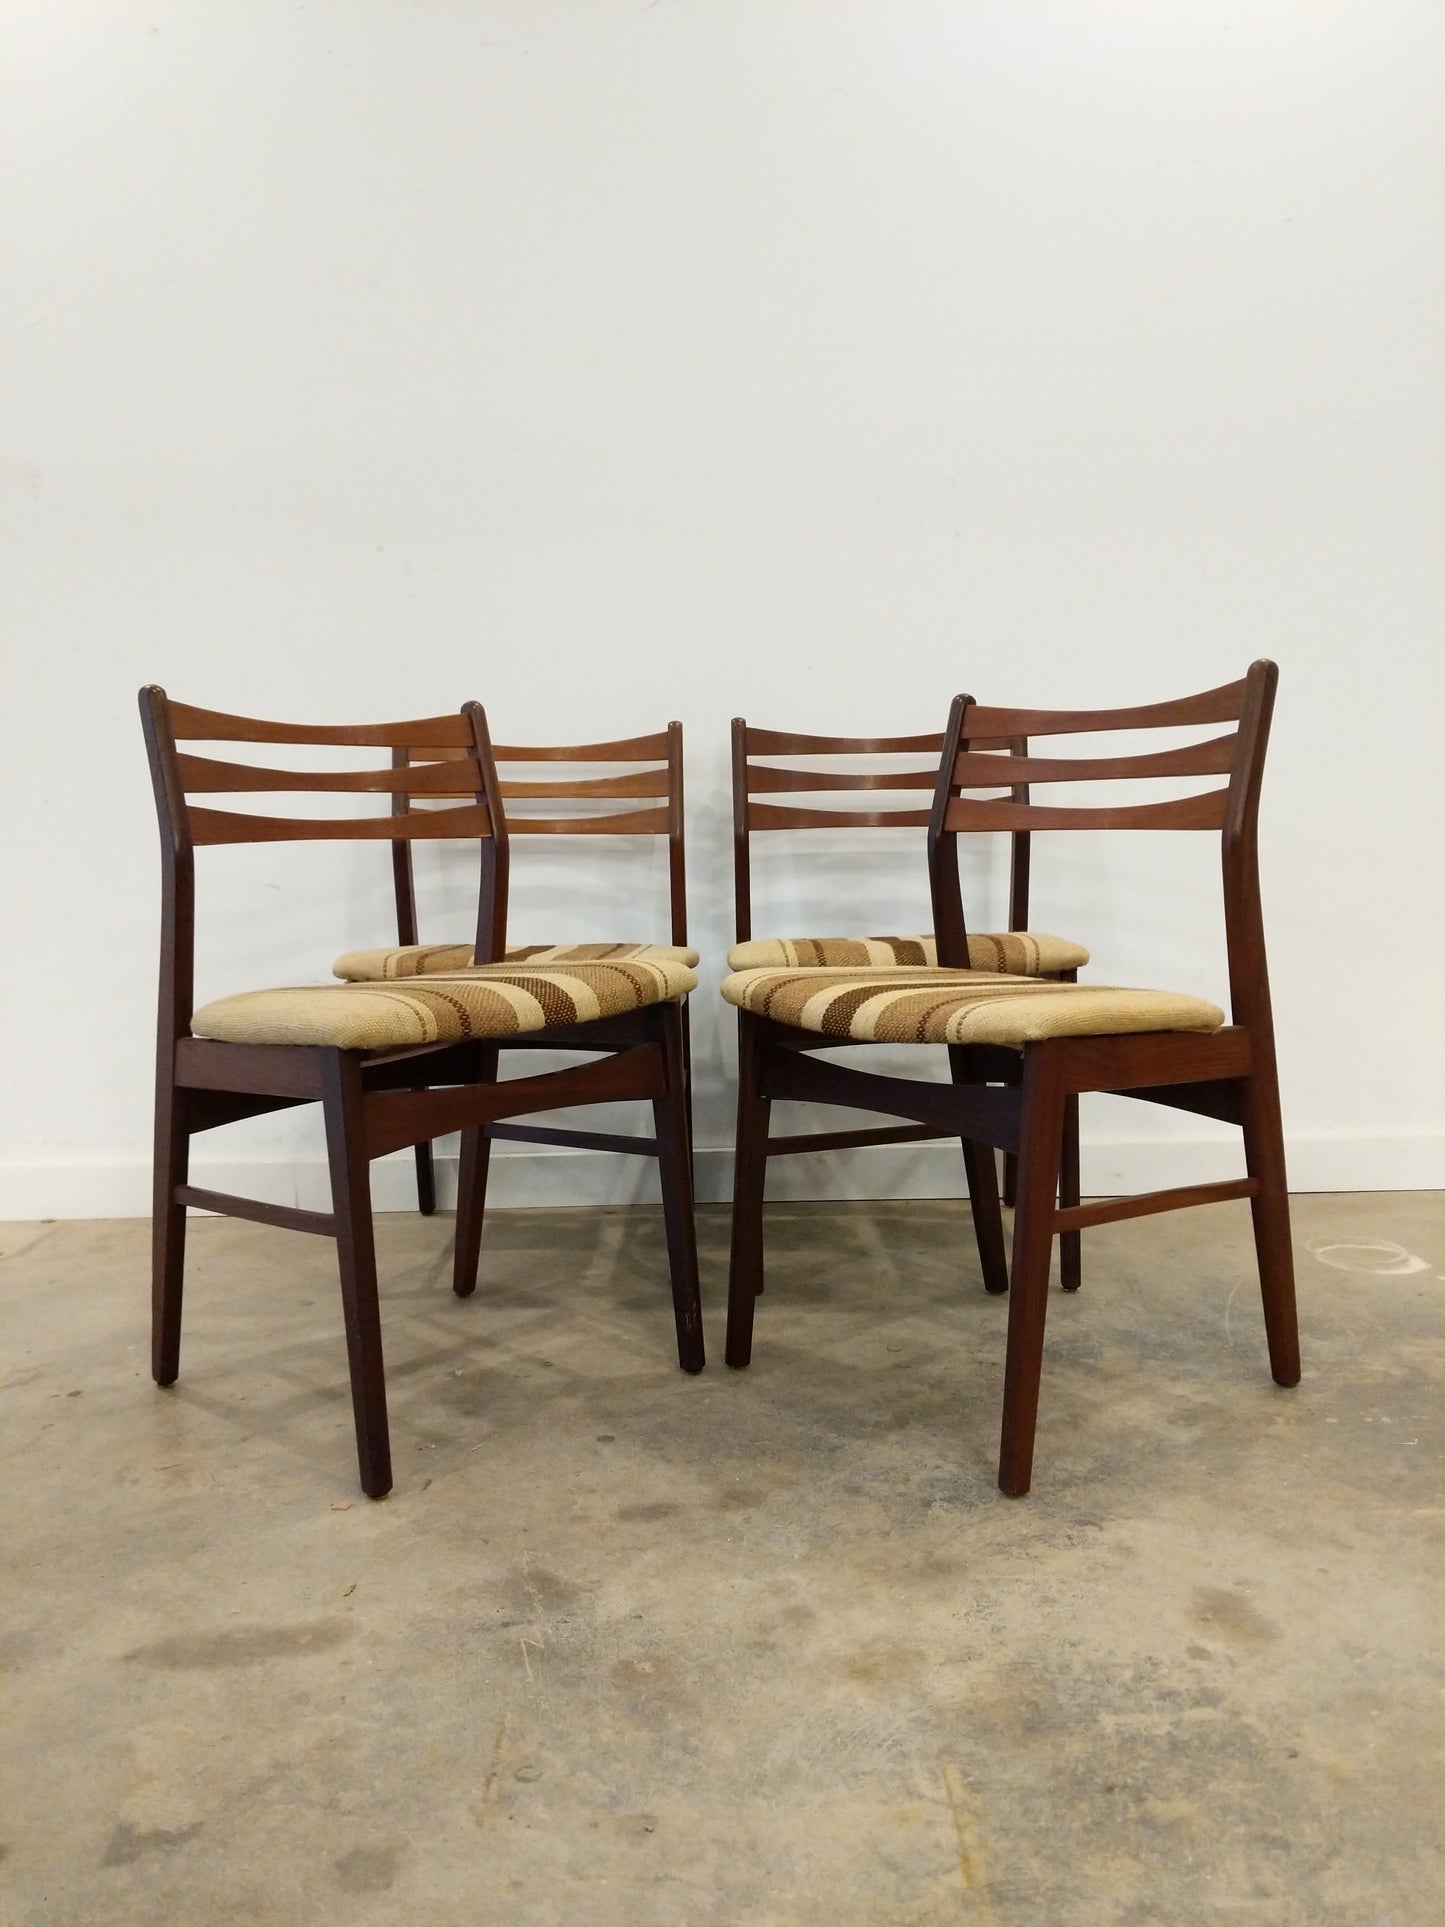 Set of 4 Vintage Danish Modern Dining Chairs